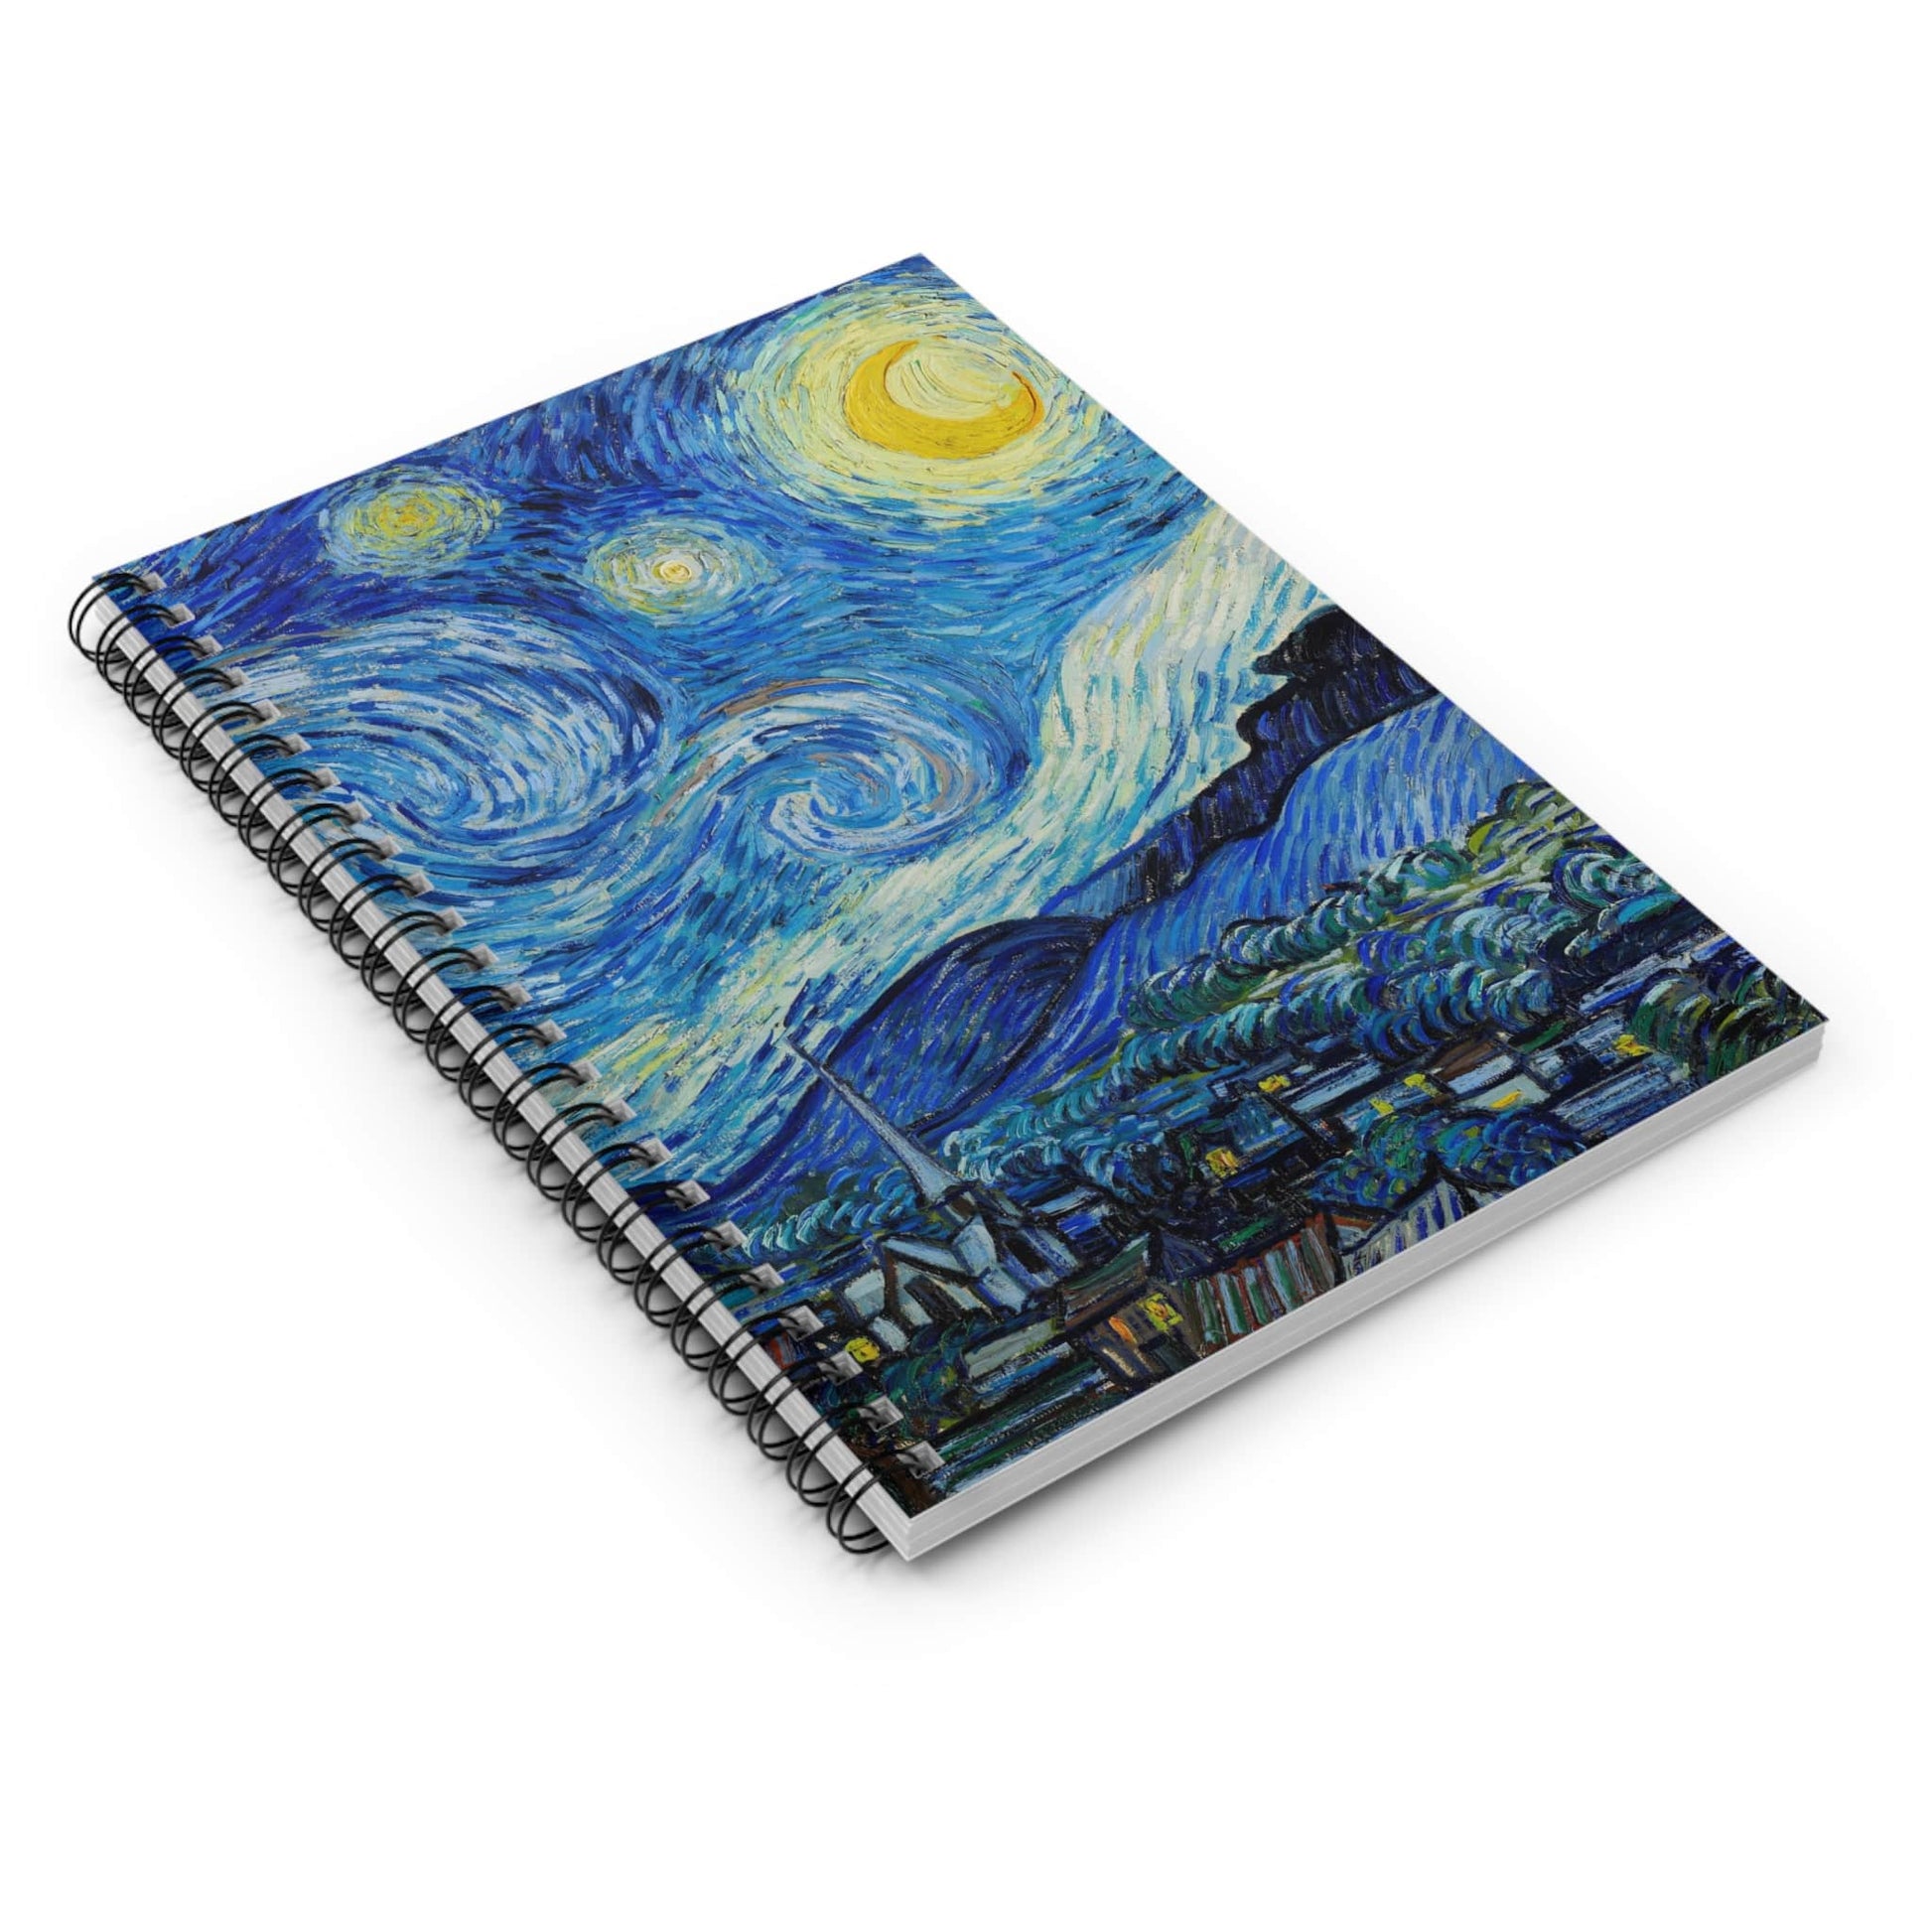 Abstract Night Sky Painting Spiral Notebook Laying Flat on White Surface